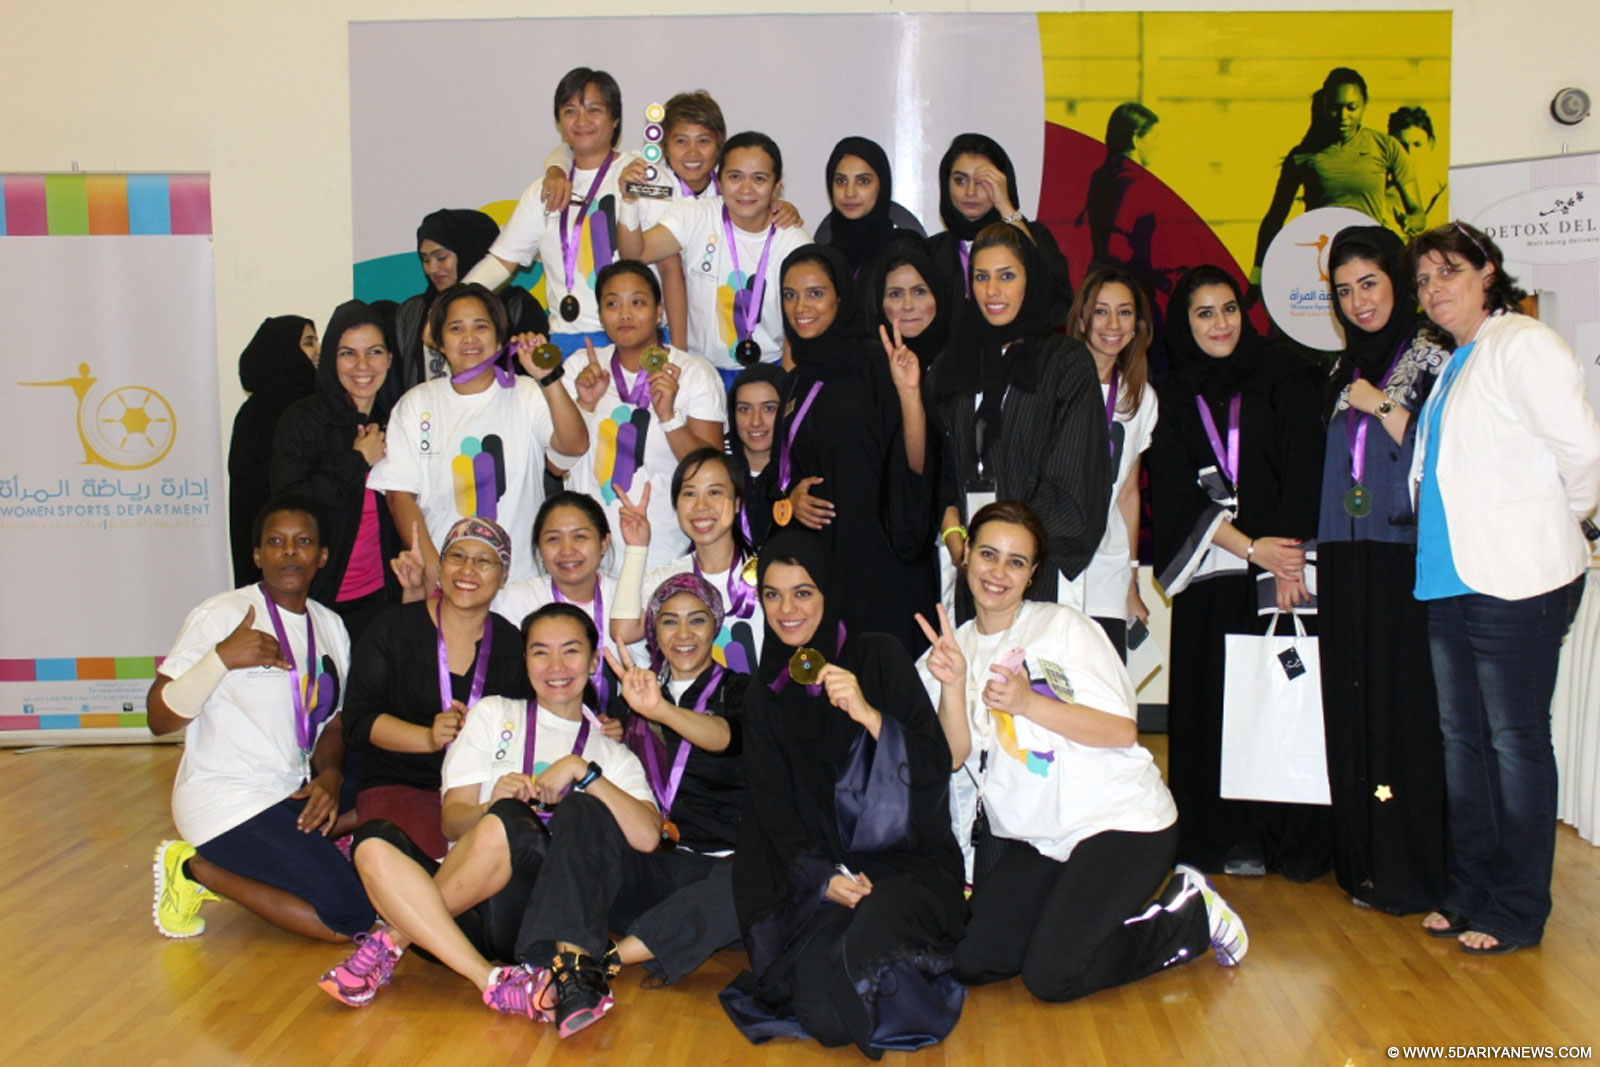 	2nd Sharjah Women Sports Cuplaunches today at the Sharjah Ladies Club